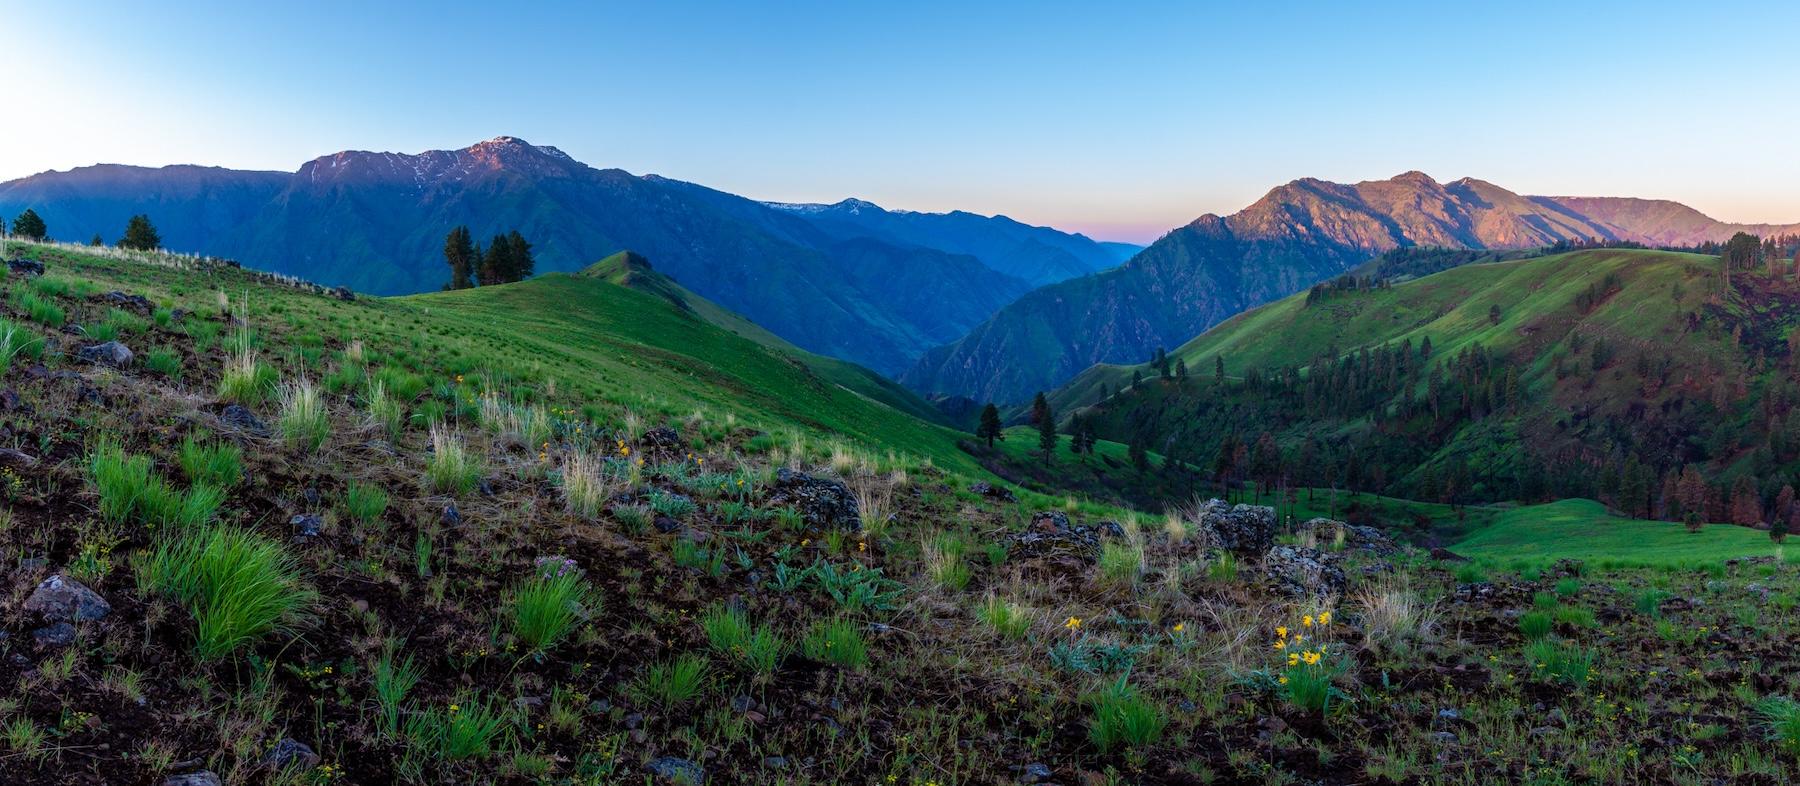 Morning Panorama of the Hat Creek drainage and Hells Canyon